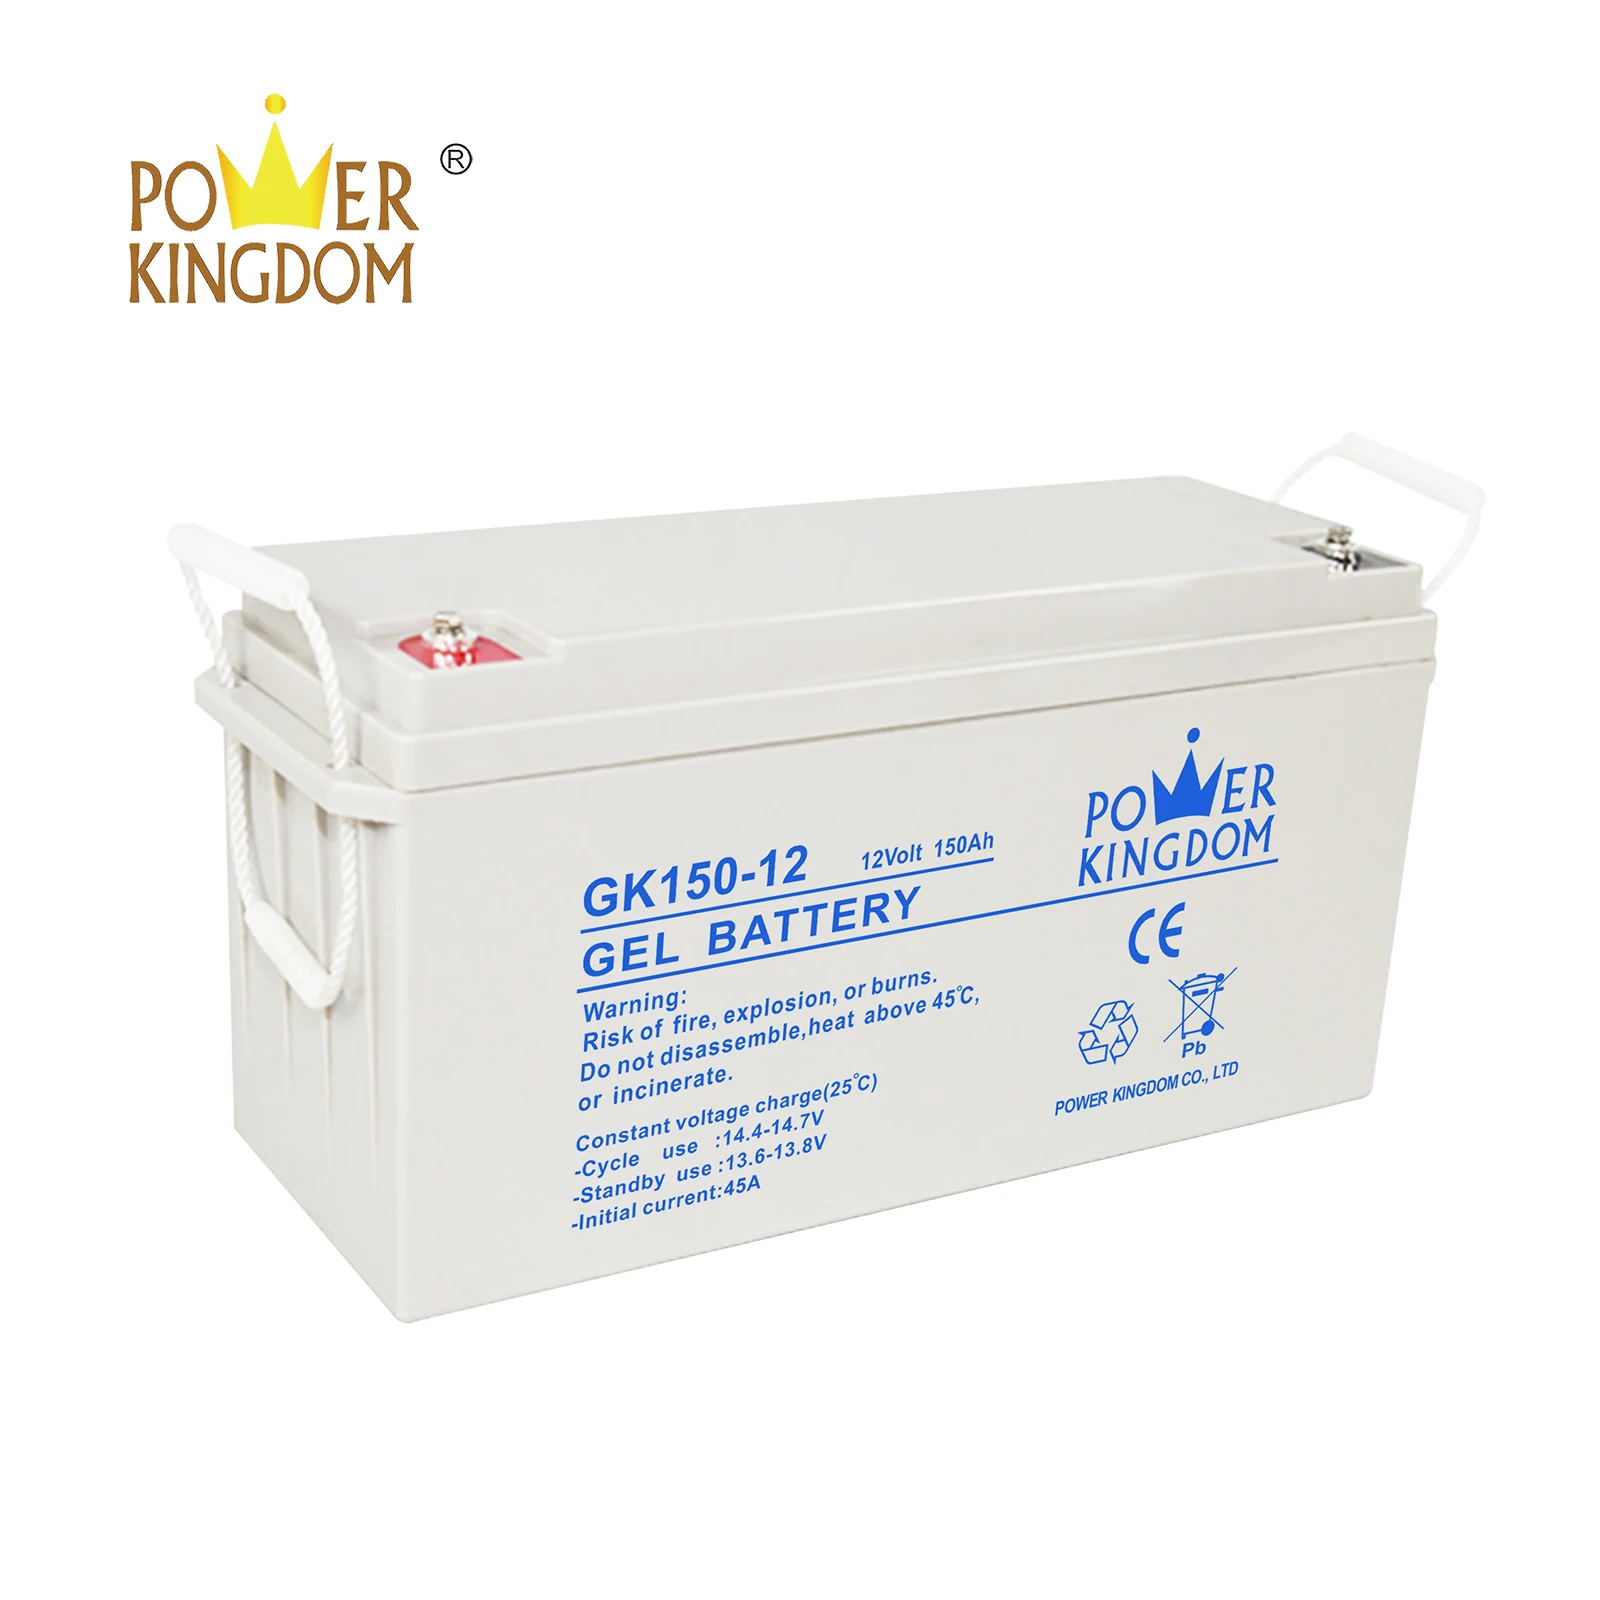 Power Kingdom high consistency 12v lead acid battery inquire now medical equipment